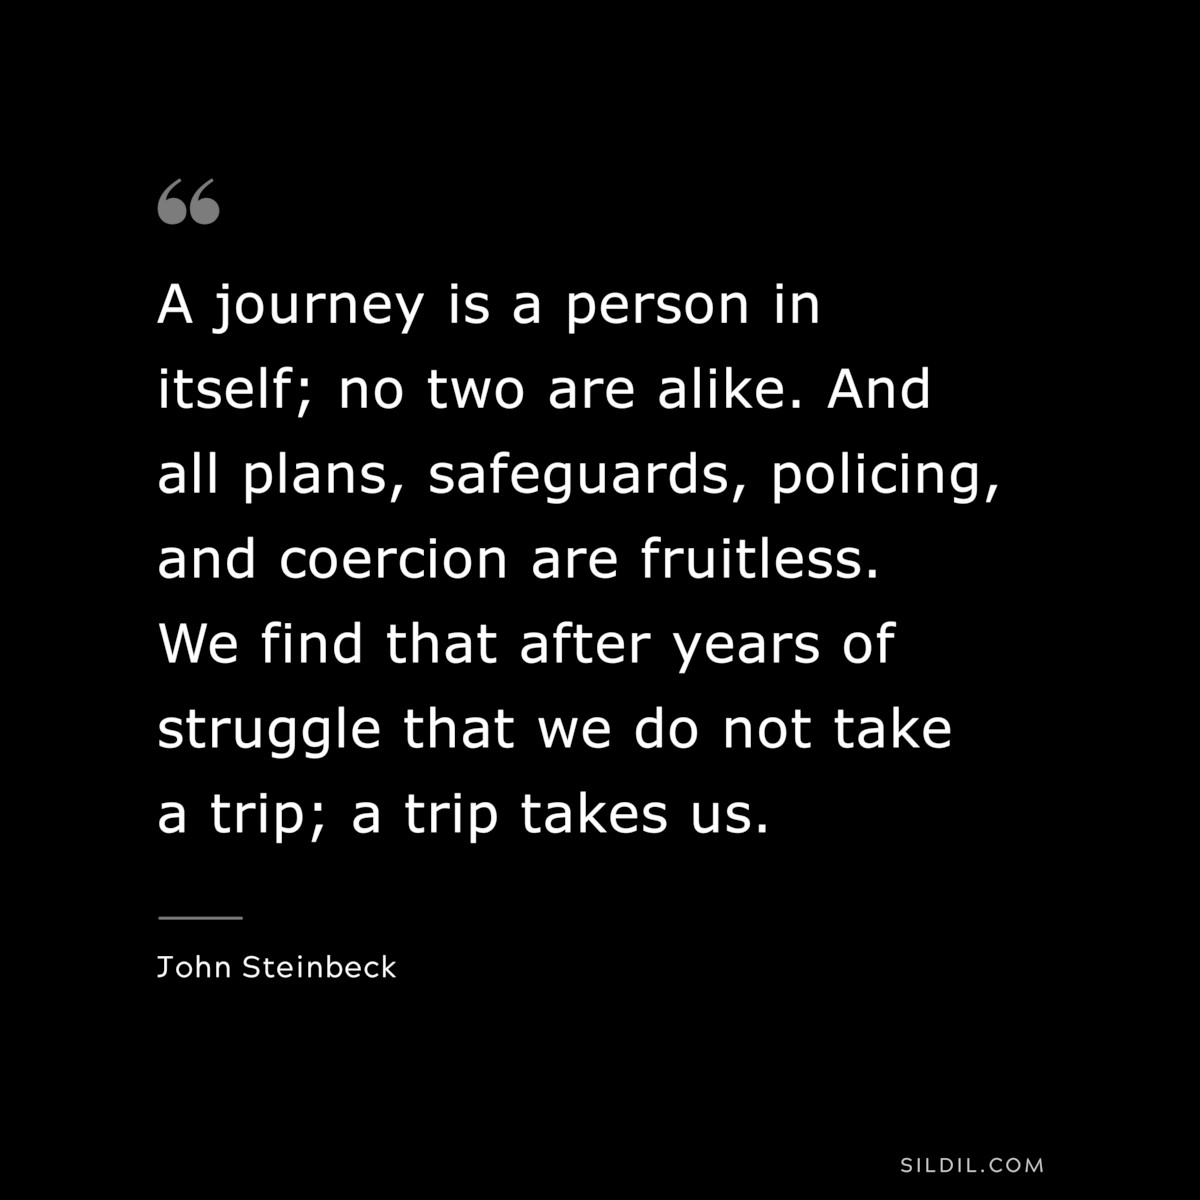 A journey is a person in itself; no two are alike. And all plans, safeguards, policing, and coercion are fruitless. We find that after years of struggle that we do not take a trip; a trip takes us.― John Steinbeck